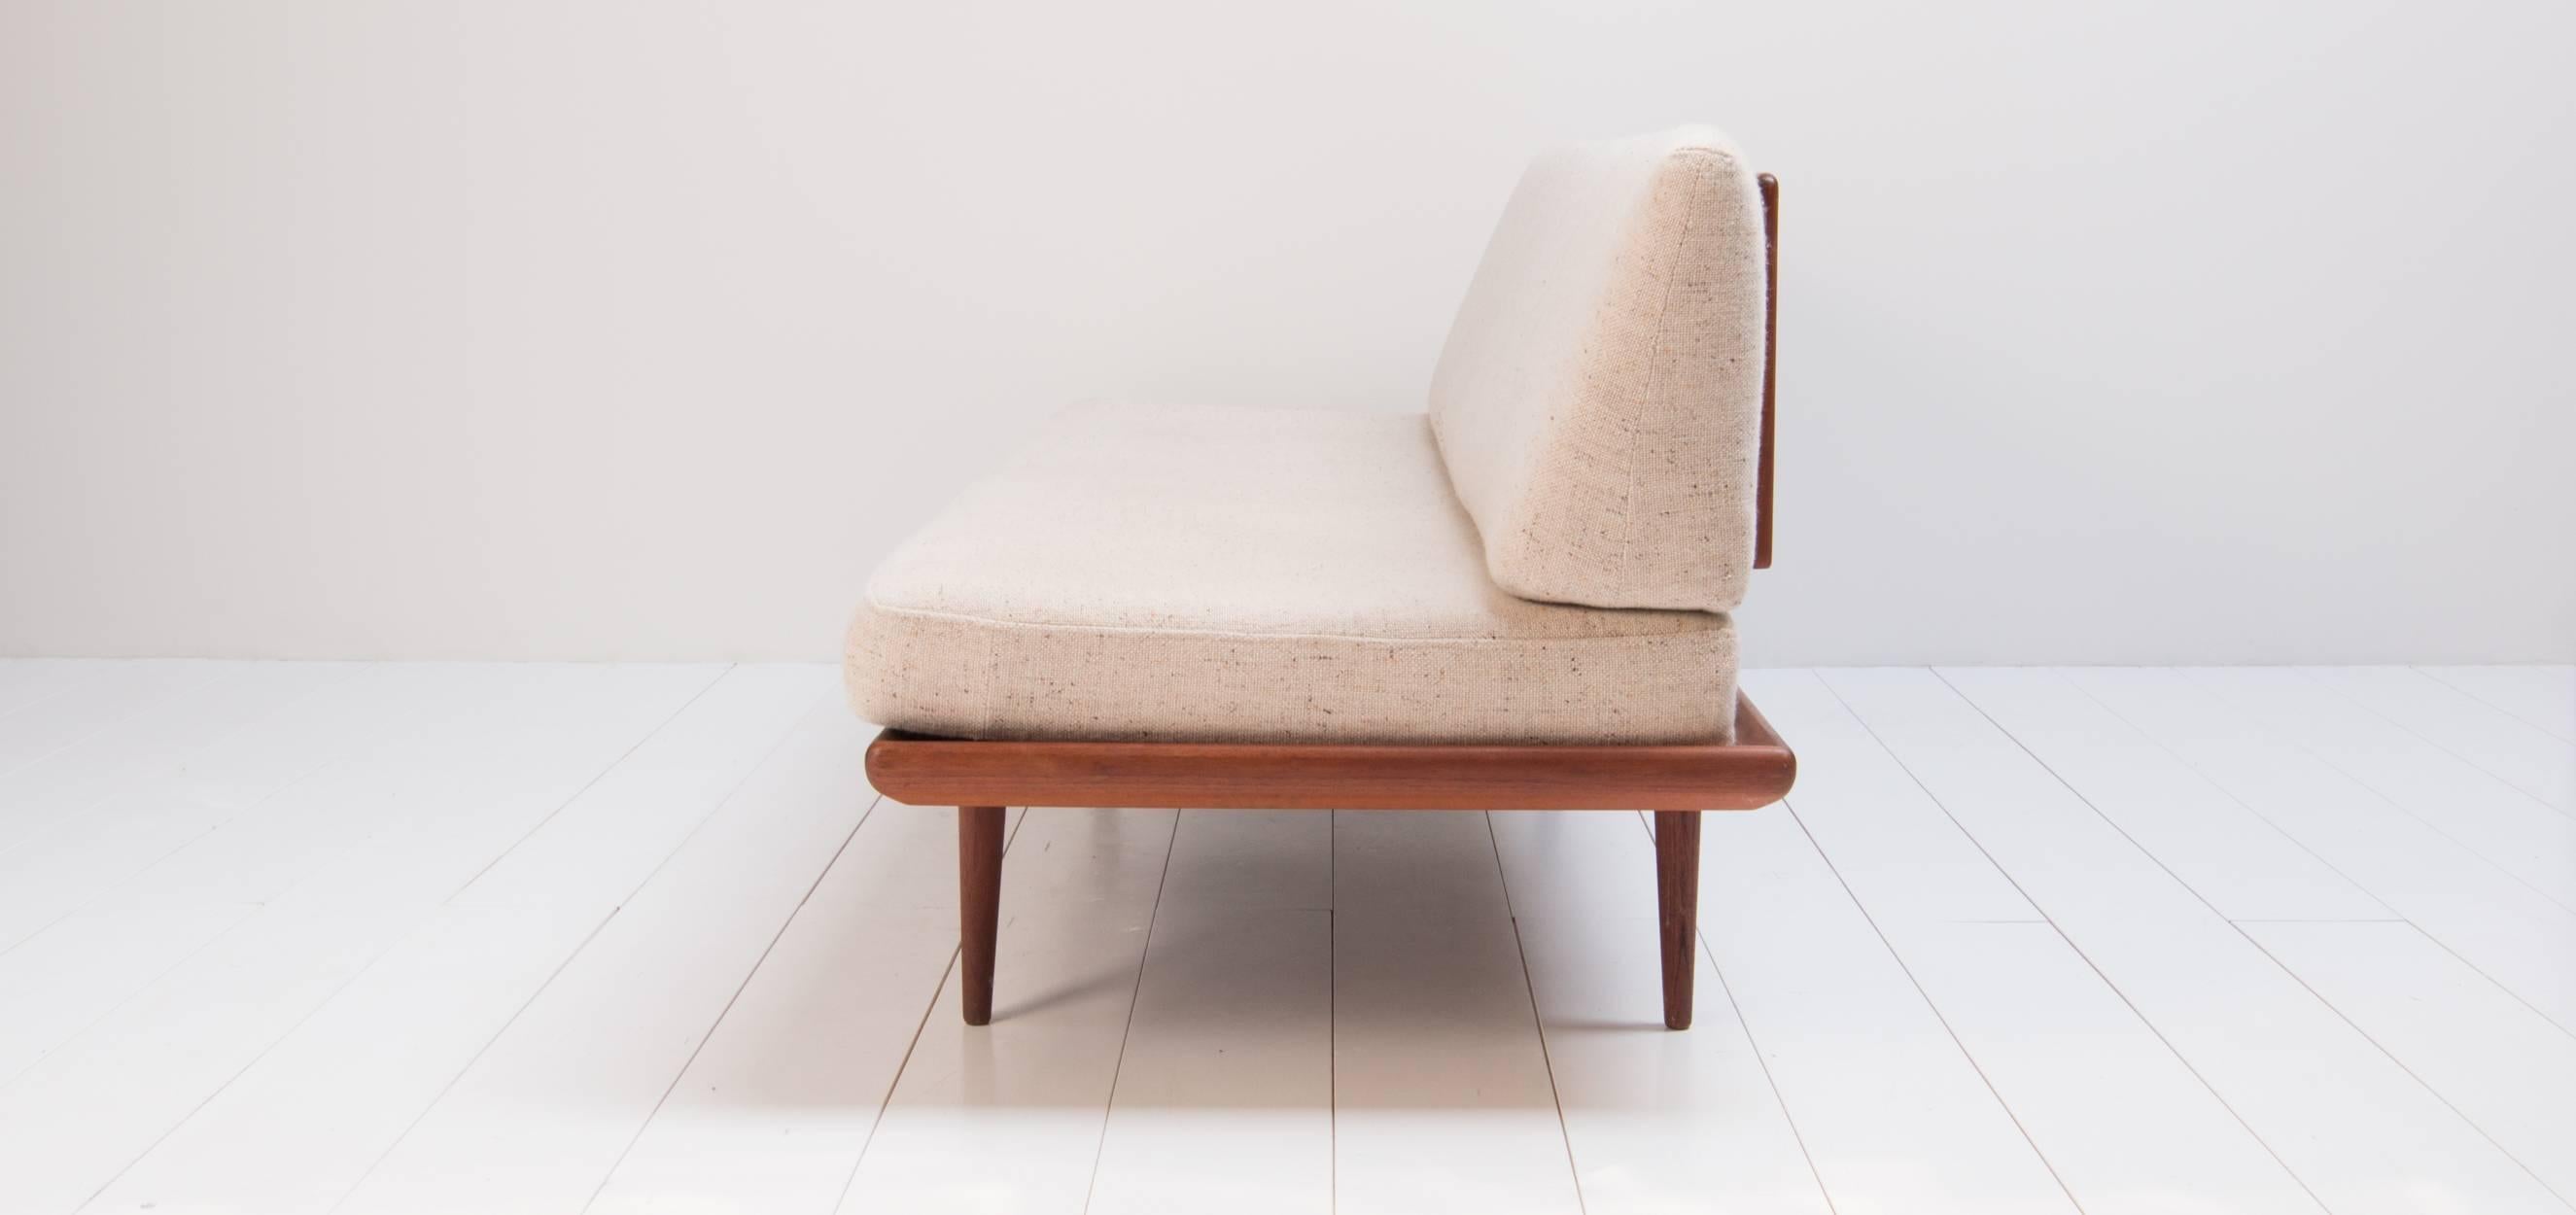 Peter Hvidt daybed produced by France and Son in the 1960s. Designed by the famous duo Peter Hivdt and Orla Moolgard Nielsen. This daybed is one of the most popular daybeds in Danish modern history. This model is called Minerva.

The Peter Hivdt